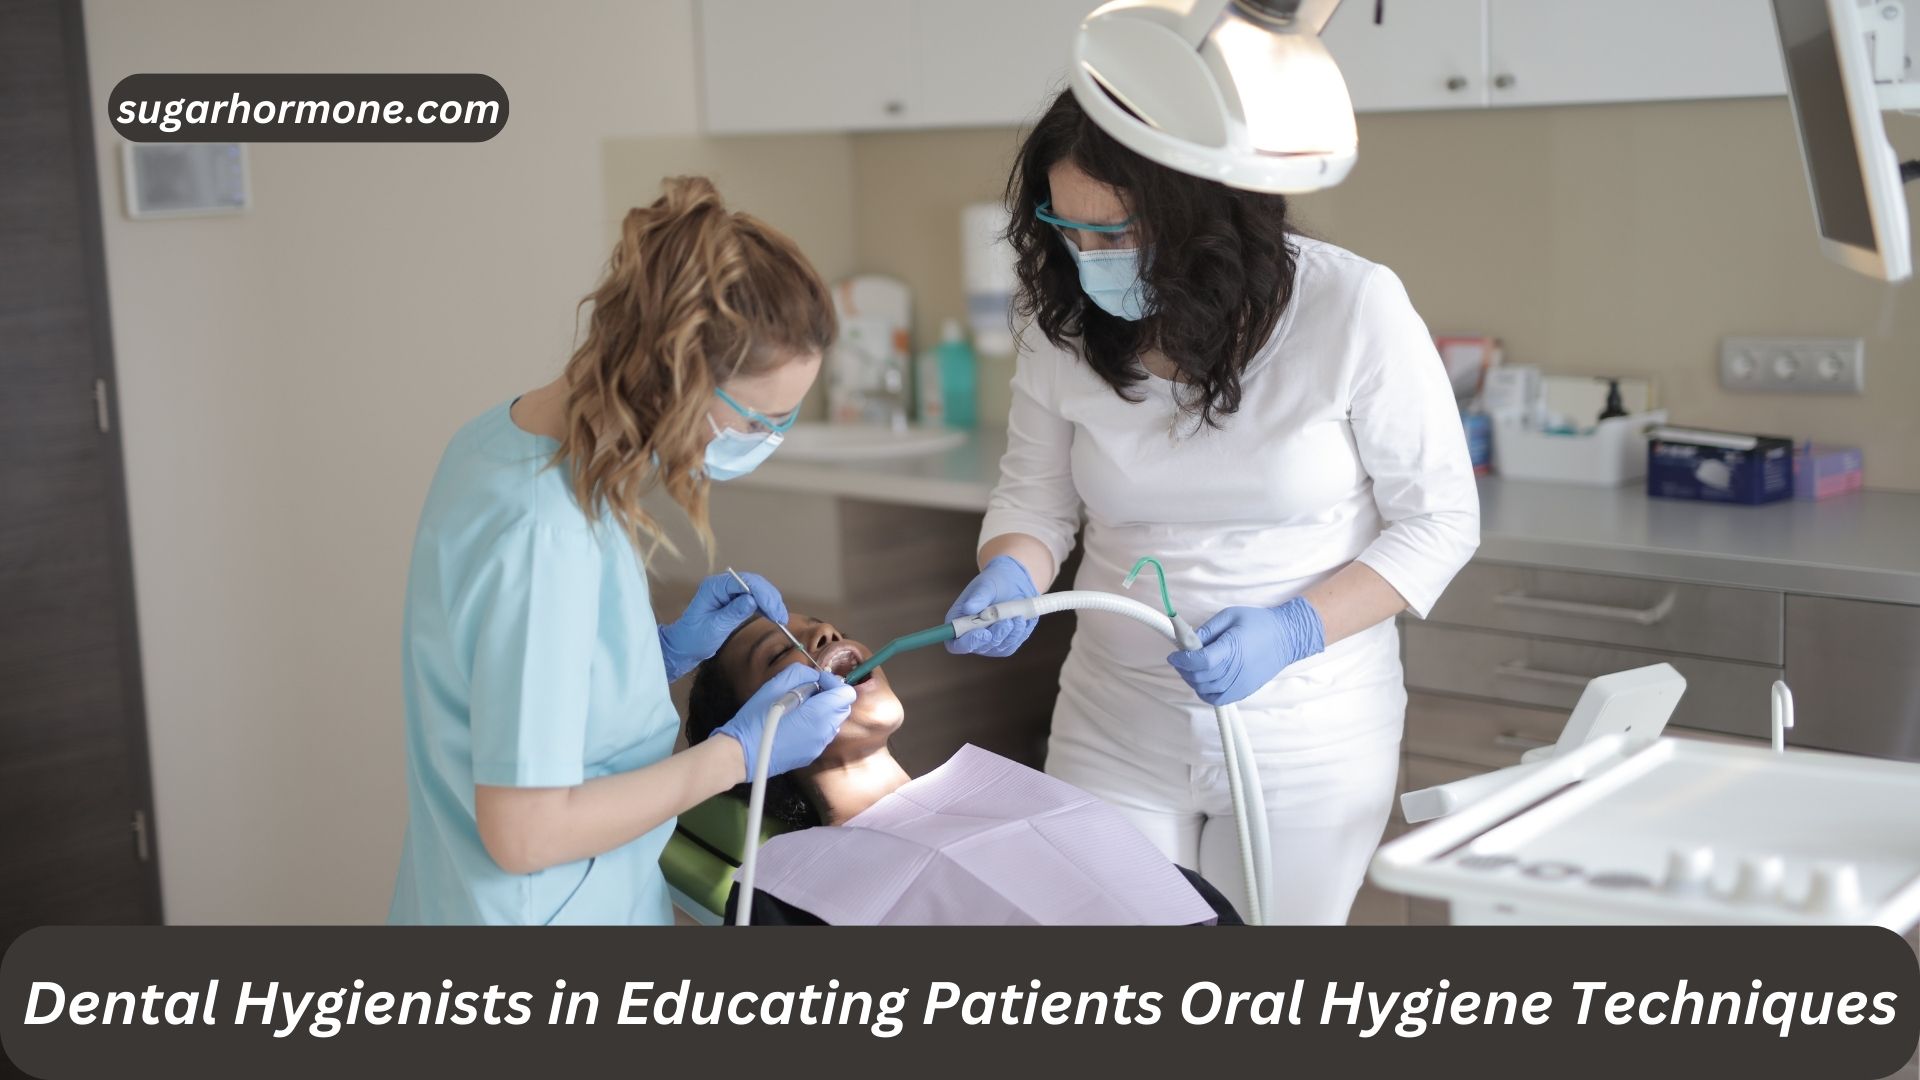 Dental Hygienists in Educating Patients Oral Hygiene Techniques